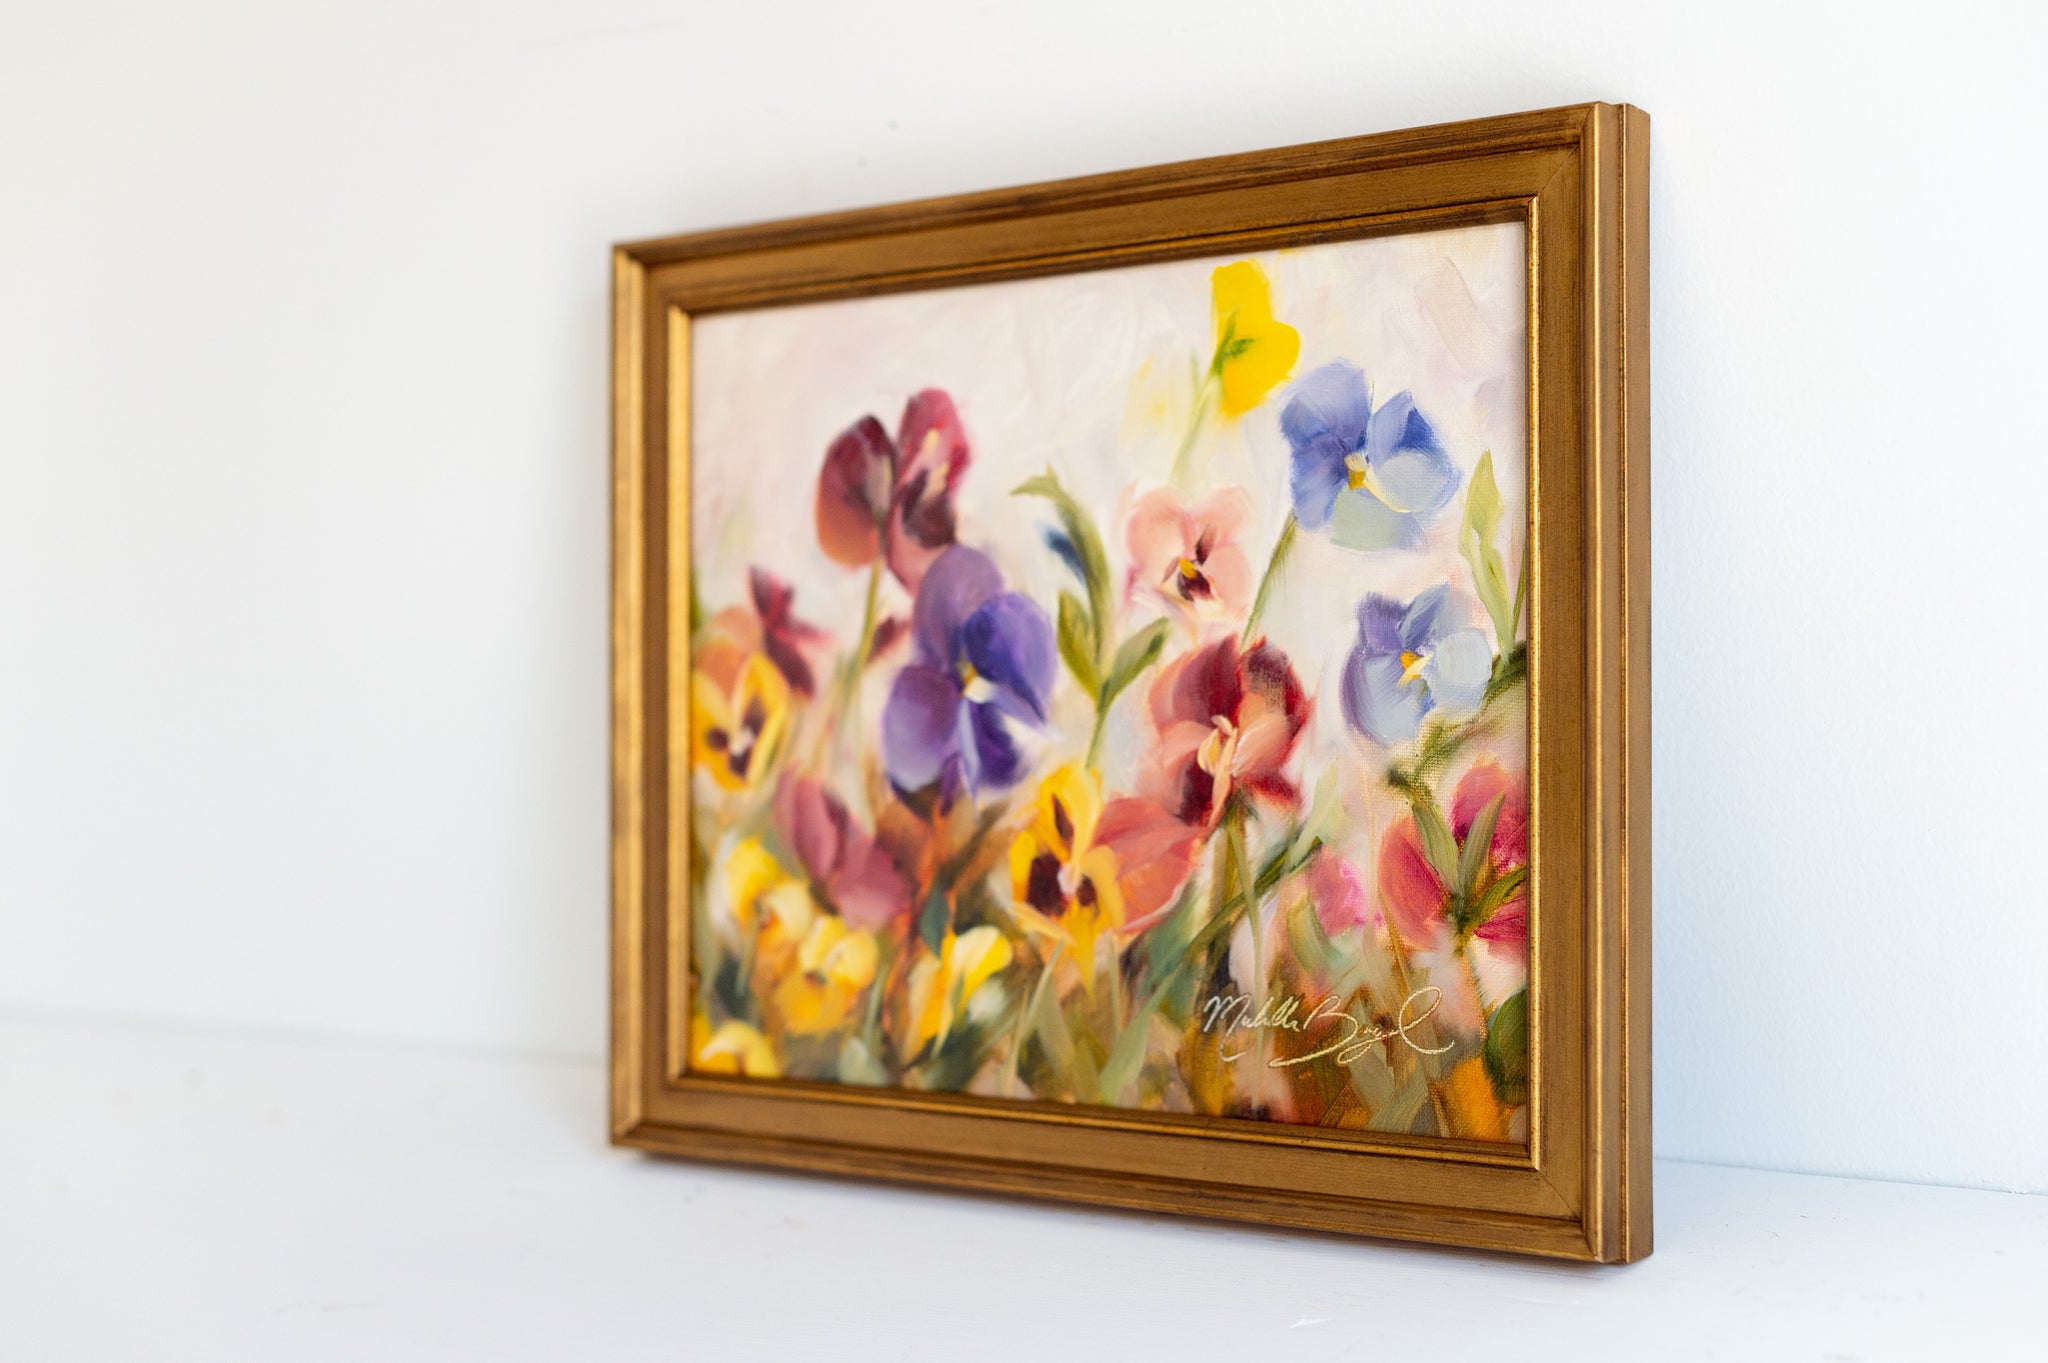 Pots of Pansies - 8x10" Framed Oil Painting